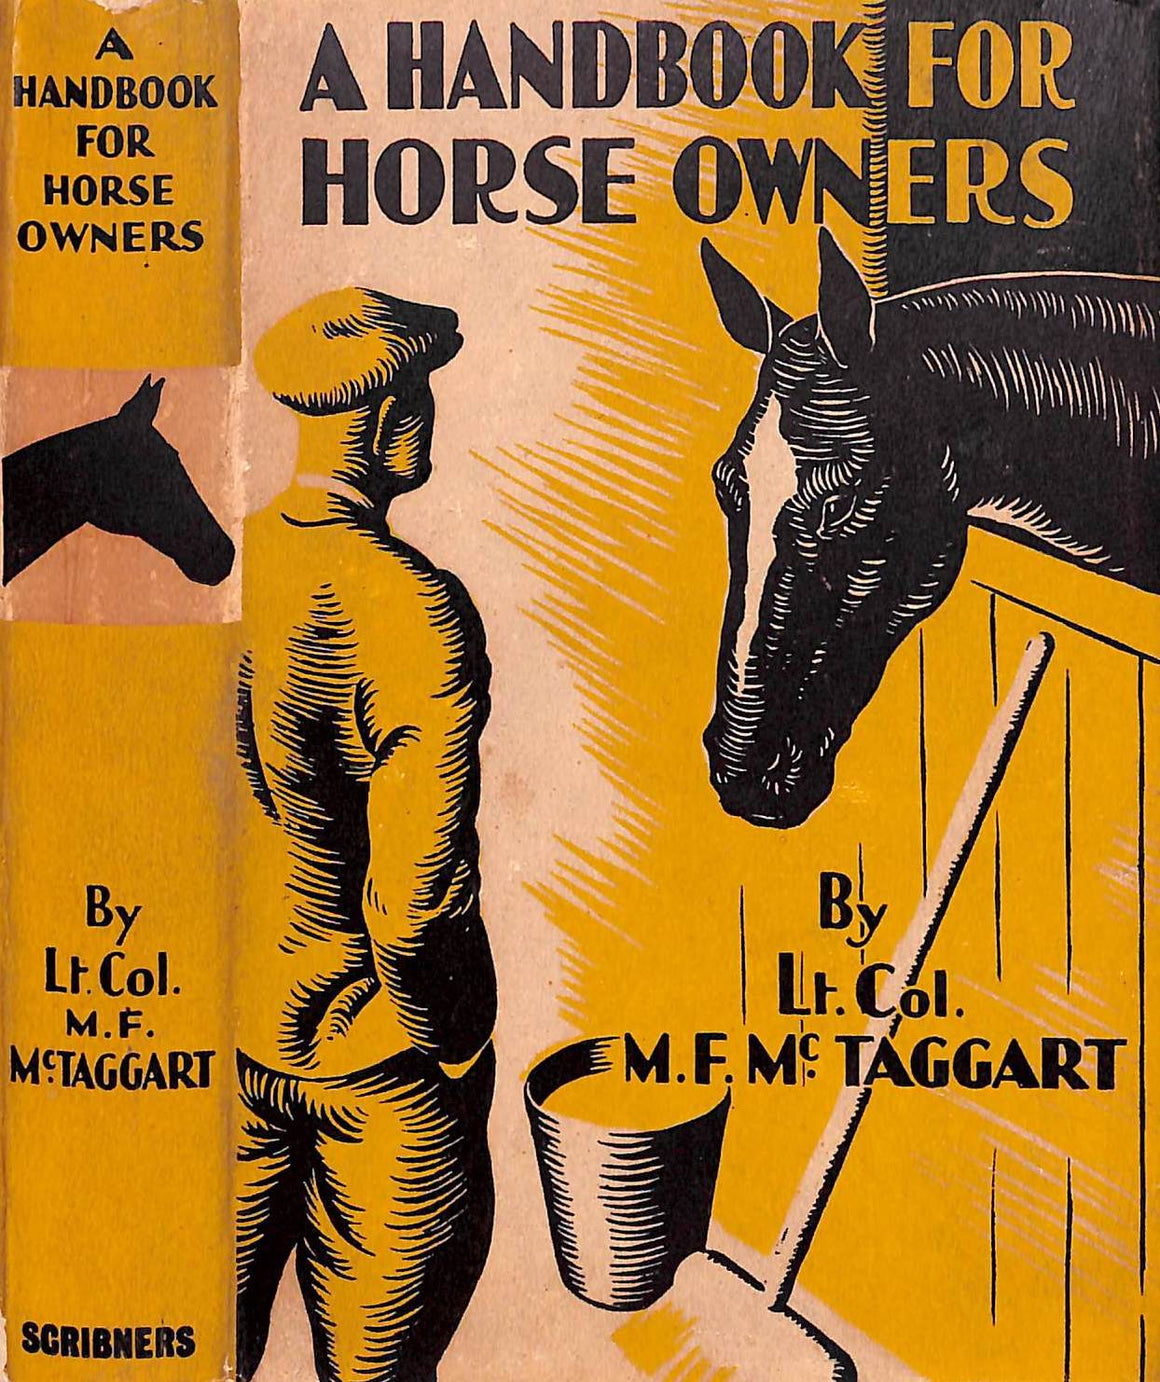 "A Handbook For Horse Owners" 1936 MCTAGGART, Lt. Col. M.F.